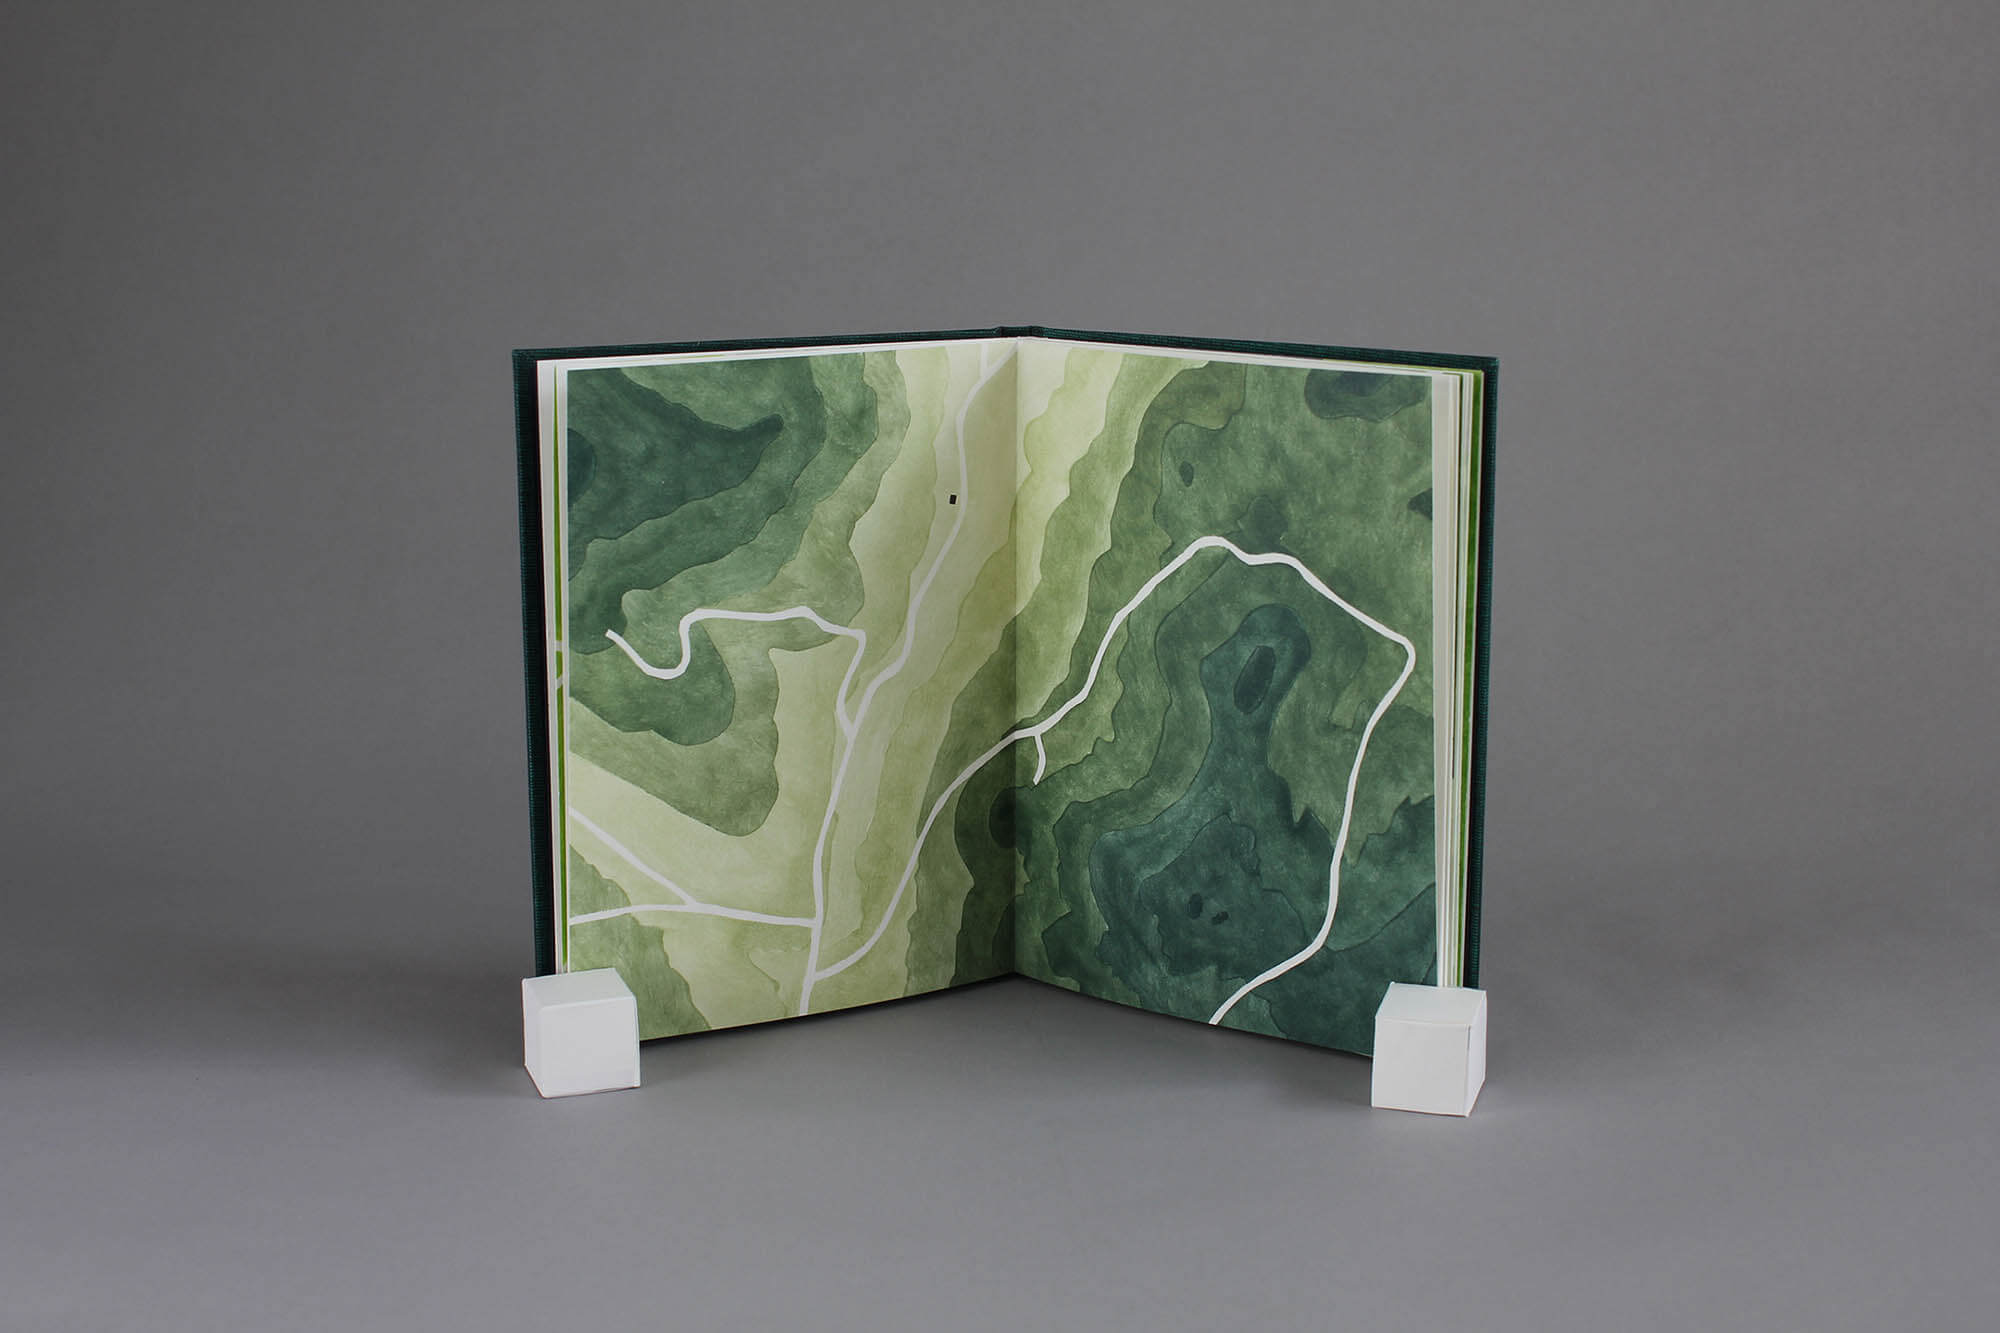 Place Memory, handmade map in a book - by Stephanie Wolff